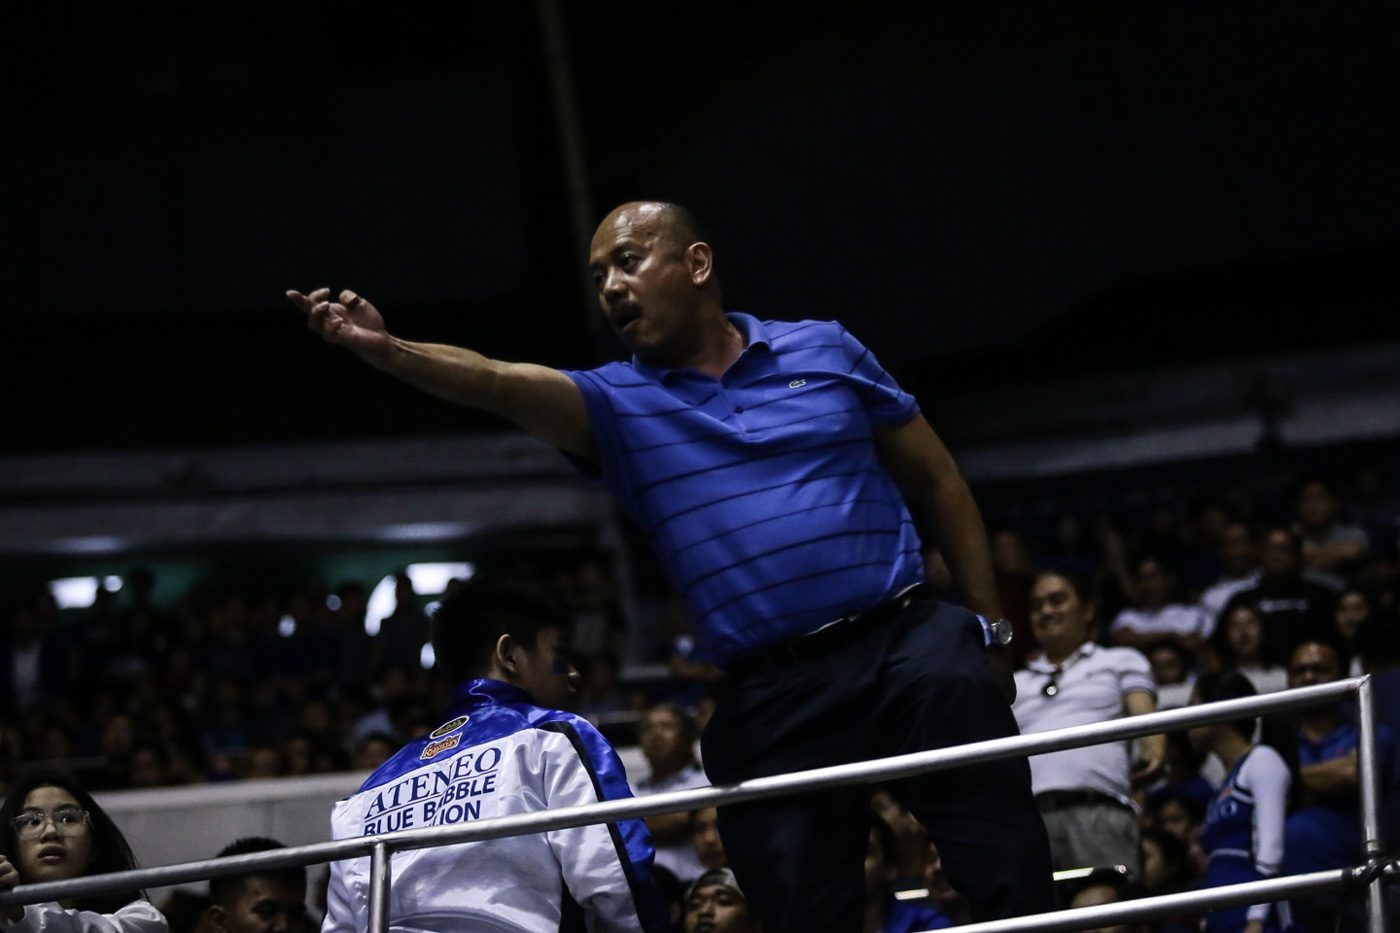 Ateneo fan apologizes for flashing middle finger at La Salle fans